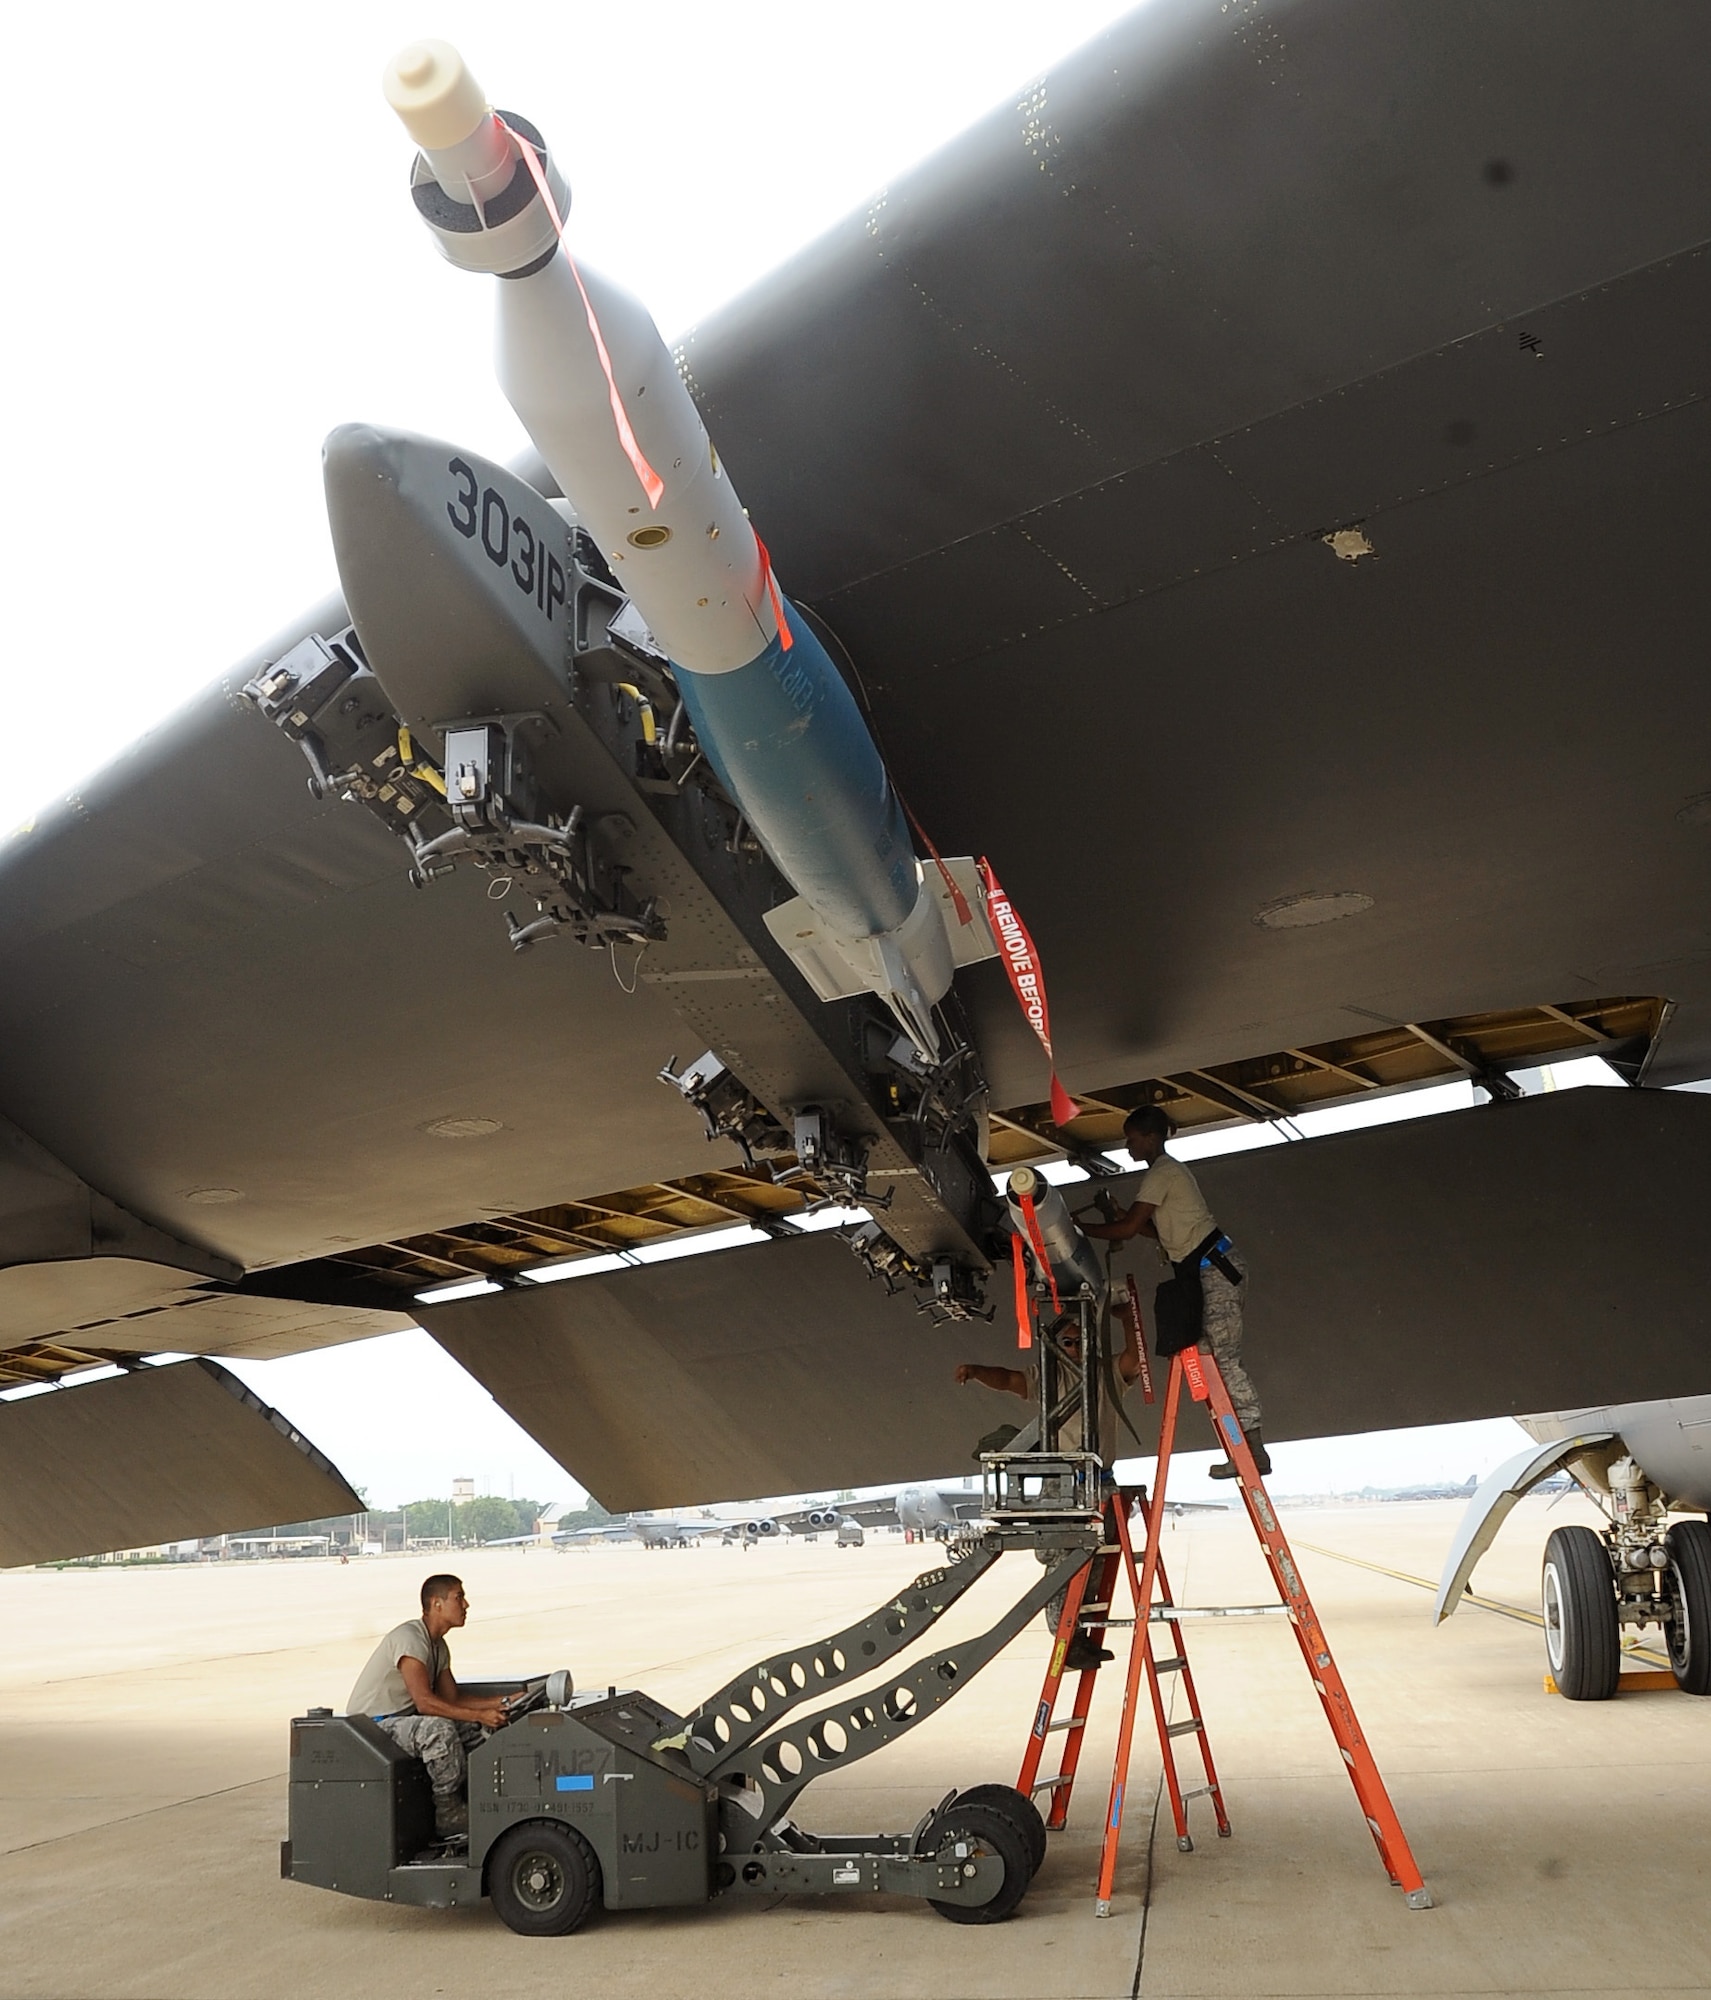 Weapons loaders from the 2nd Maintenance Operations Squadron attach GBU-12s to a B-52H Stratofortress on Barksdale Air Force Base, La., Aug. 15. The munitions were being loaded to be dropped at a bombing range in Utah for Exercise Combat Hammer. The exercise evaluates the employment of precision guided munitions to ensure the weapons are fully functional and mission capable. (U.S. Air Force photo/Staff Sgt. Amber Ashcraft)(RELEASED)